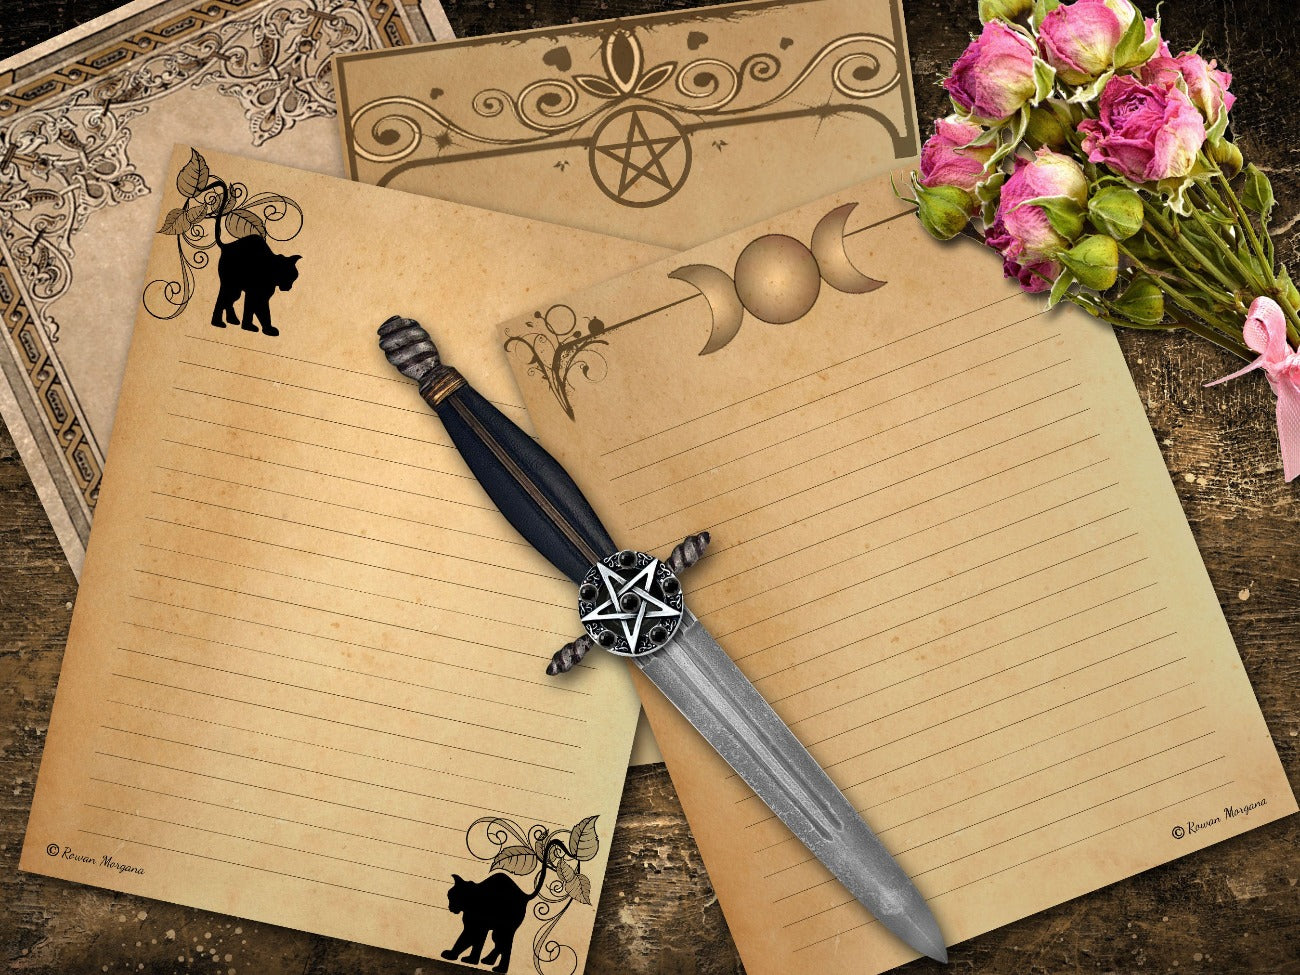 WICCA GRIMOIRE JOURNAL 4 Blank Pages, placed on a wooden desk with a bouquet of pink roses - Witchcraft Book of Shadows Printable - Morgana Magick Spell